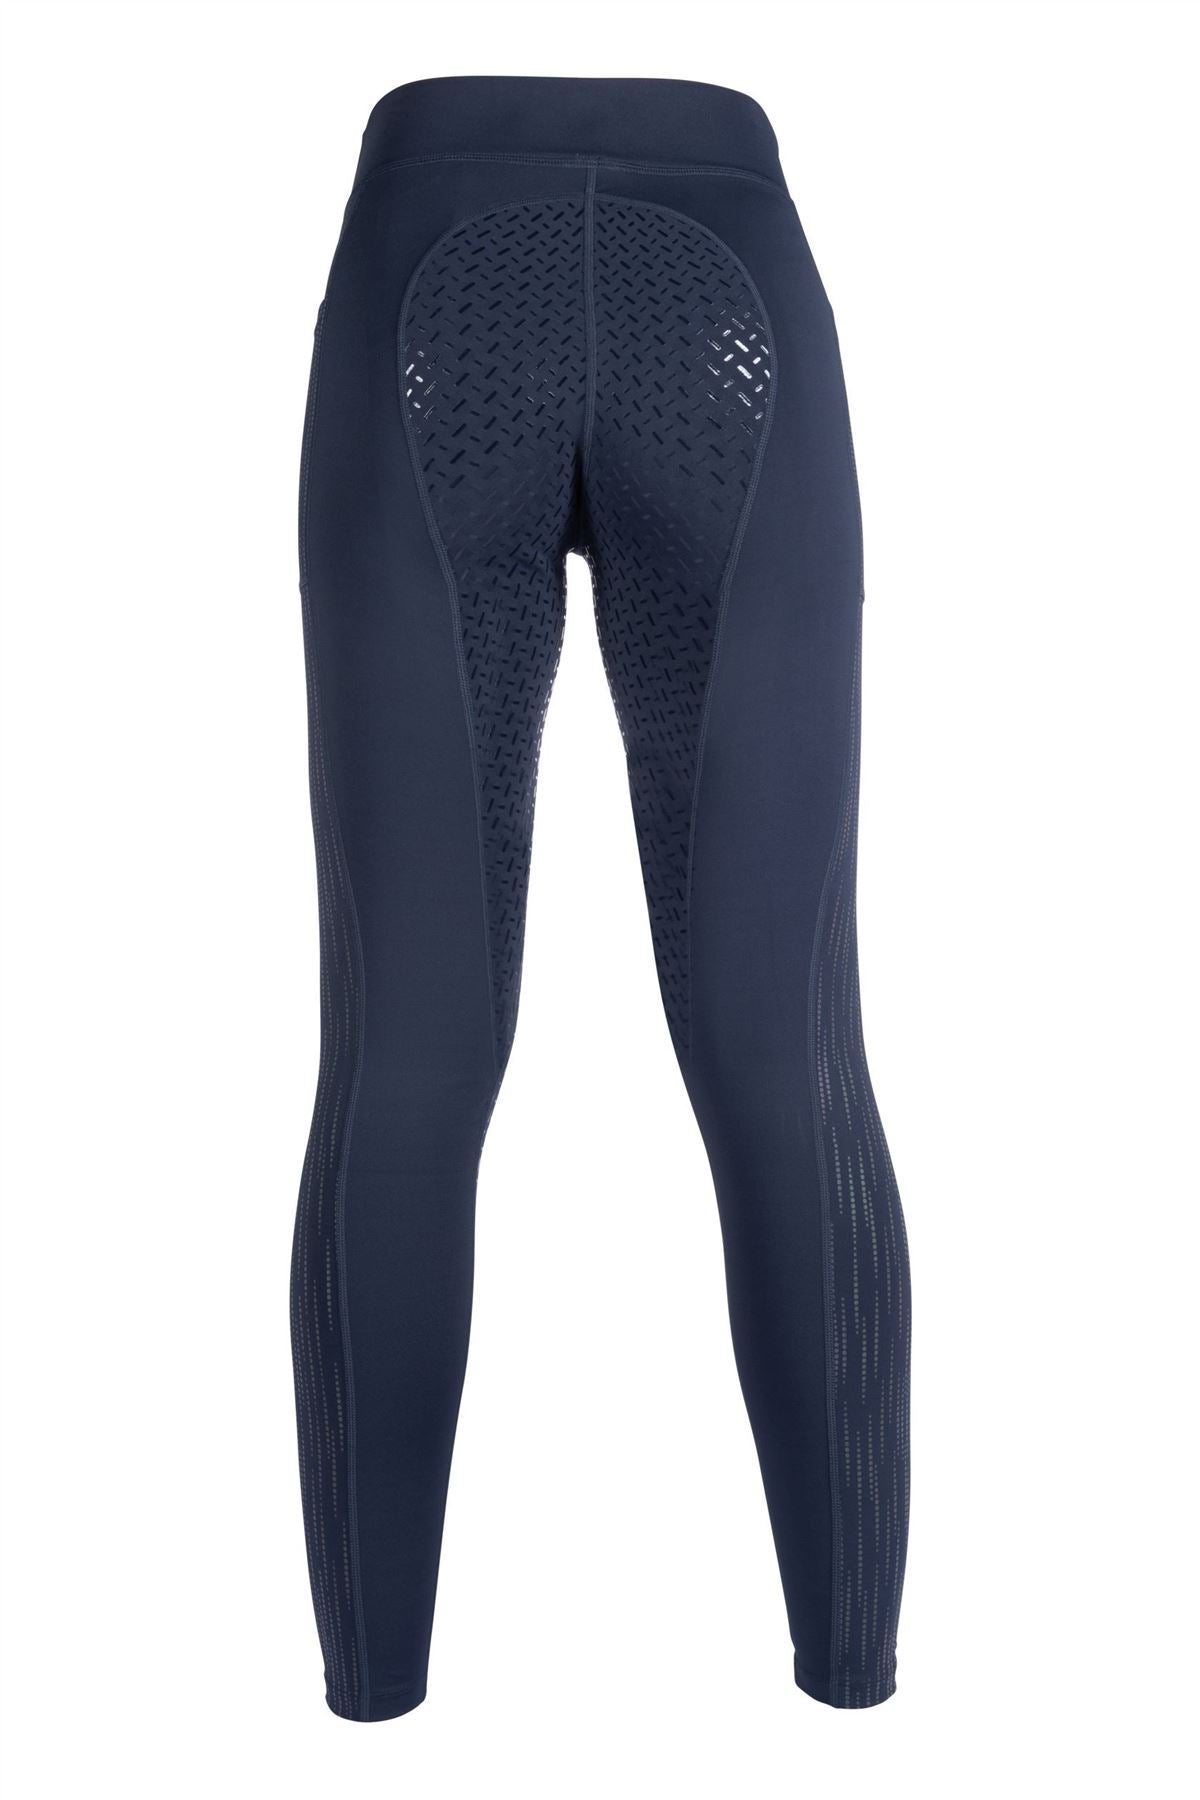 HKM Riding Leggings Flow Reflective Sil. Full Seat - Just Horse Riders